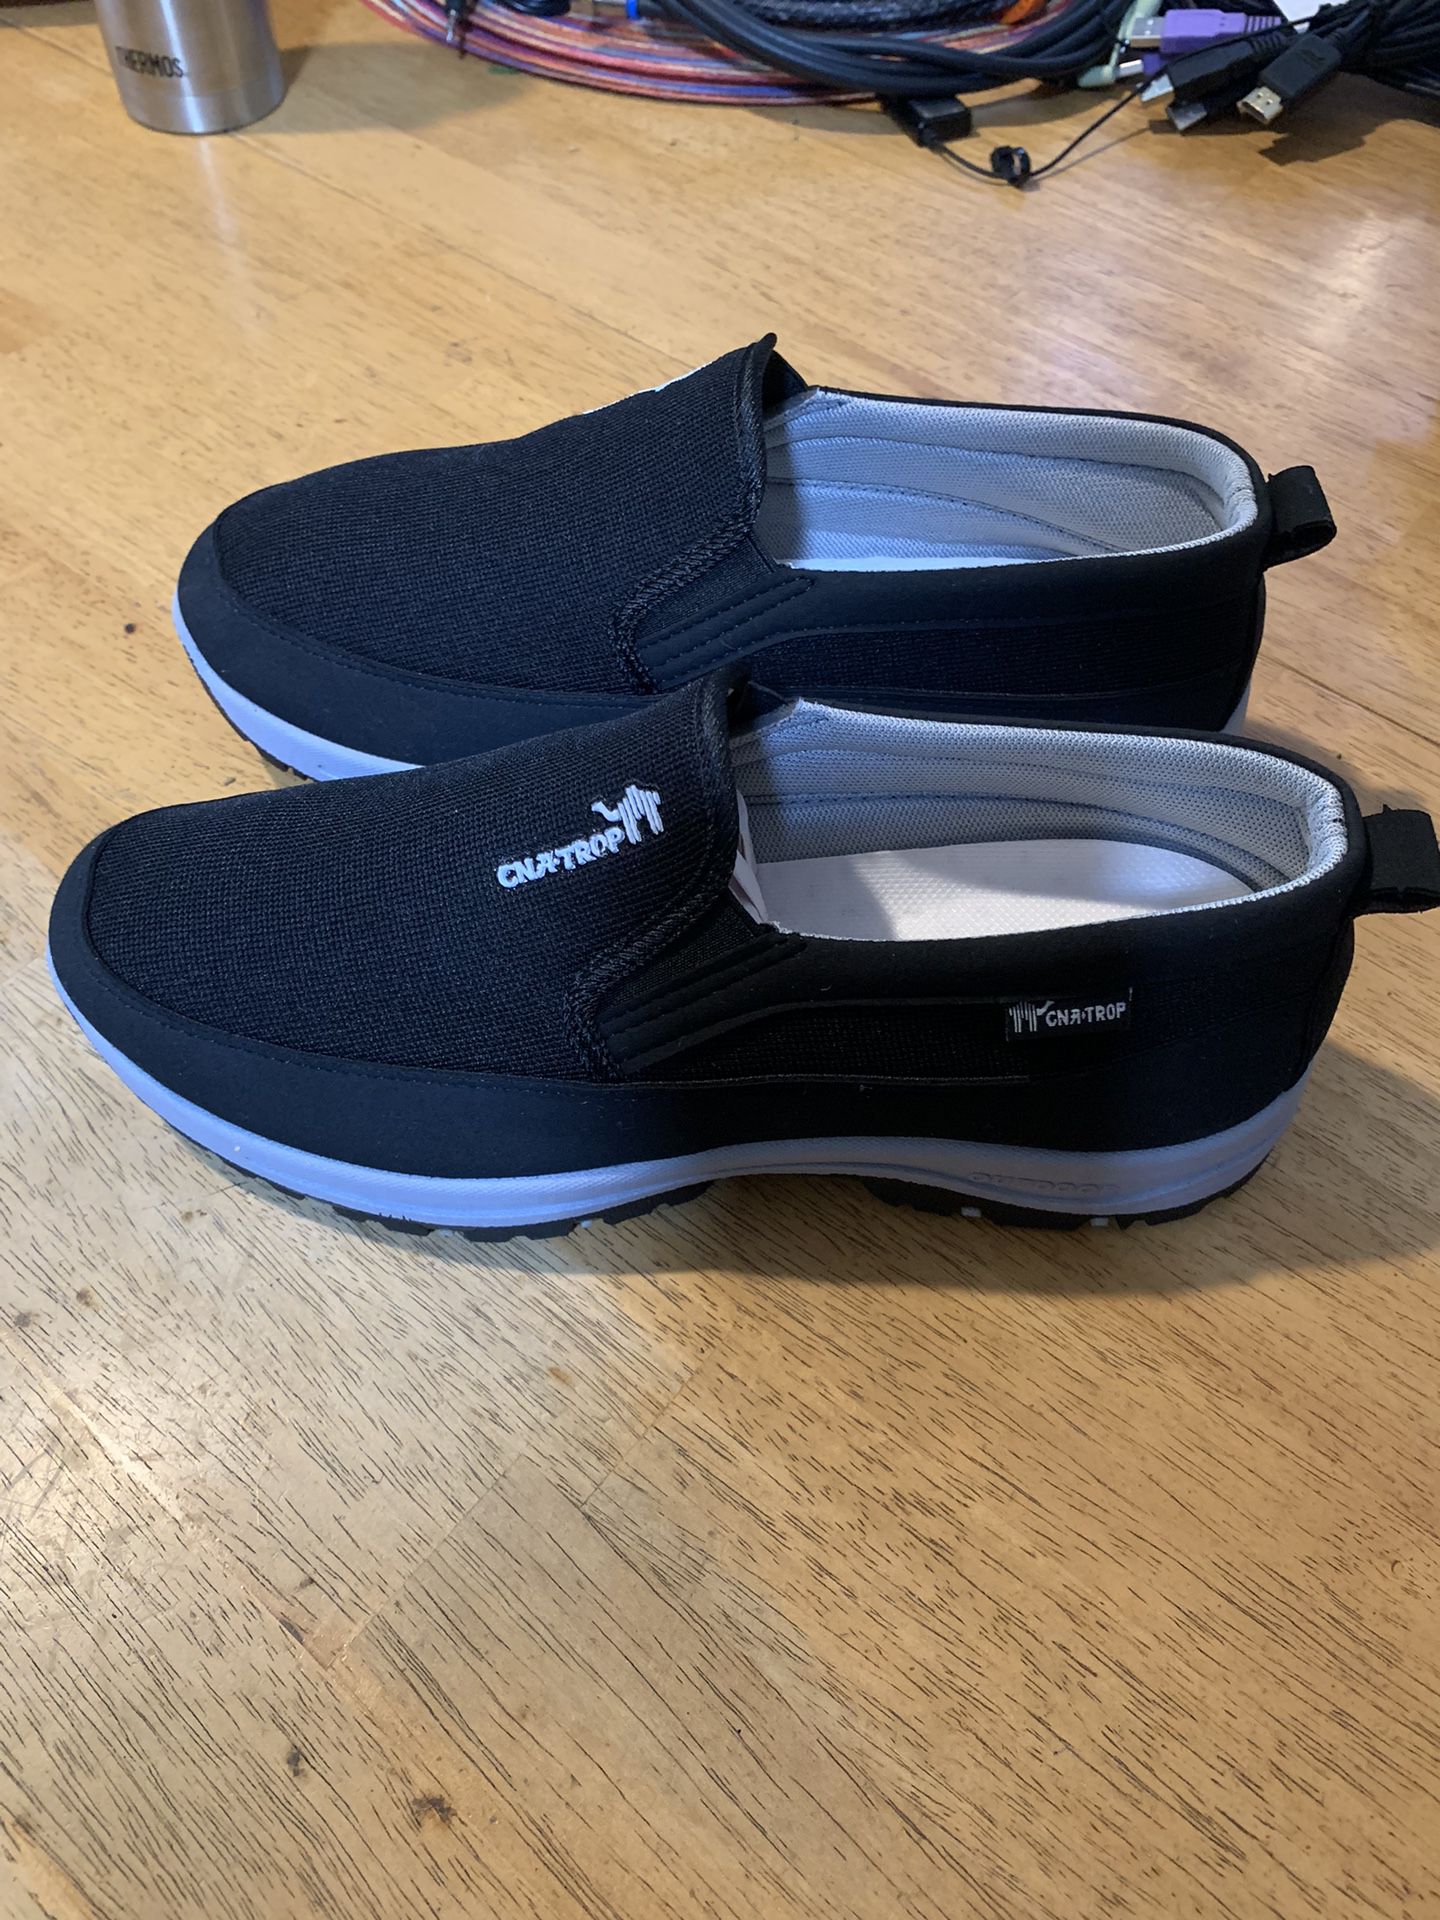 Shoes Slip-On BRAND NEW